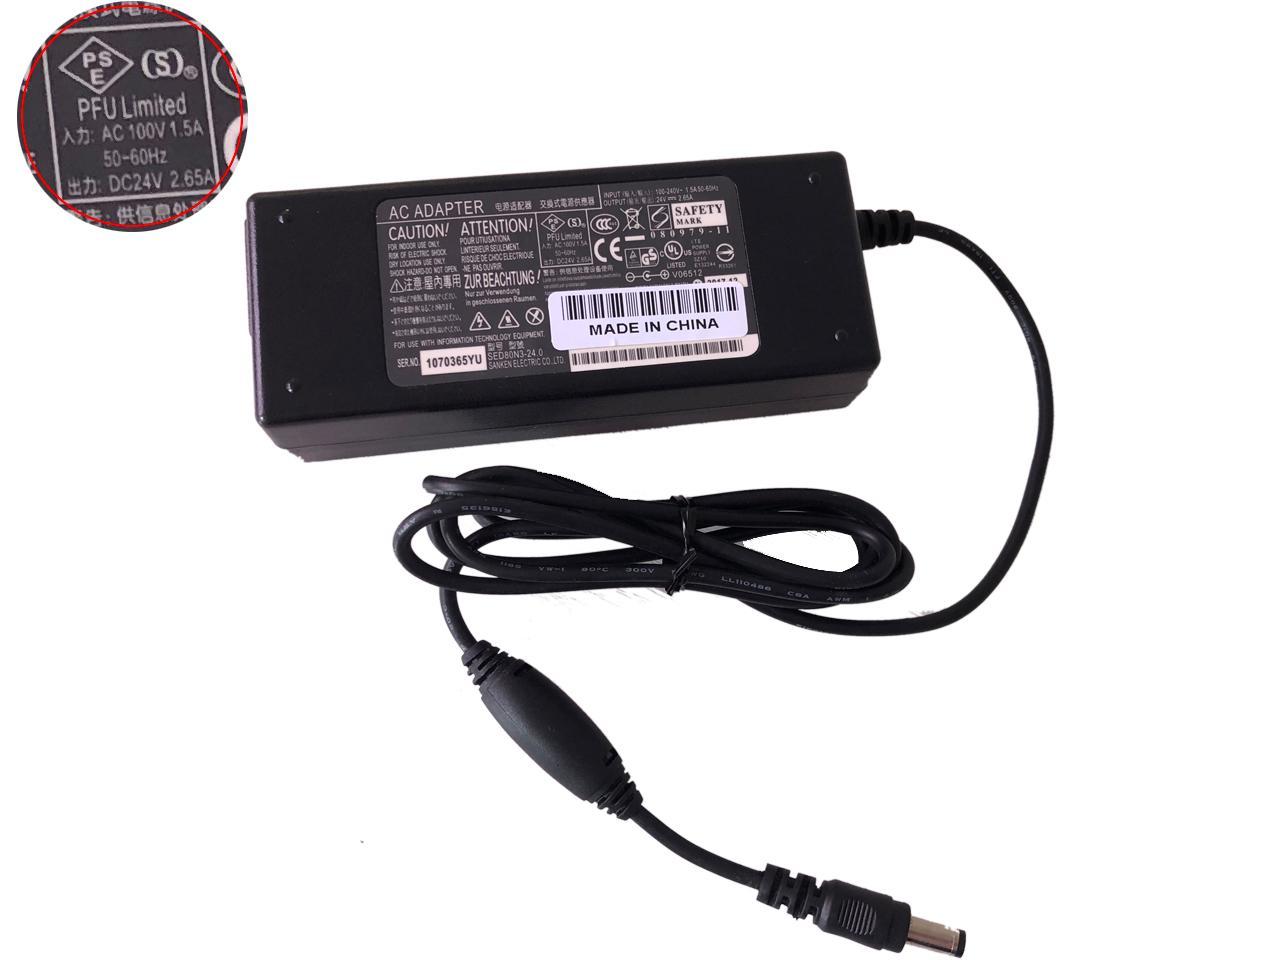 DC 24V 24 V Volt Adapter POWER SUPPLY CABLE FOR DYMO LABEL PRINTER Thermal Duo 